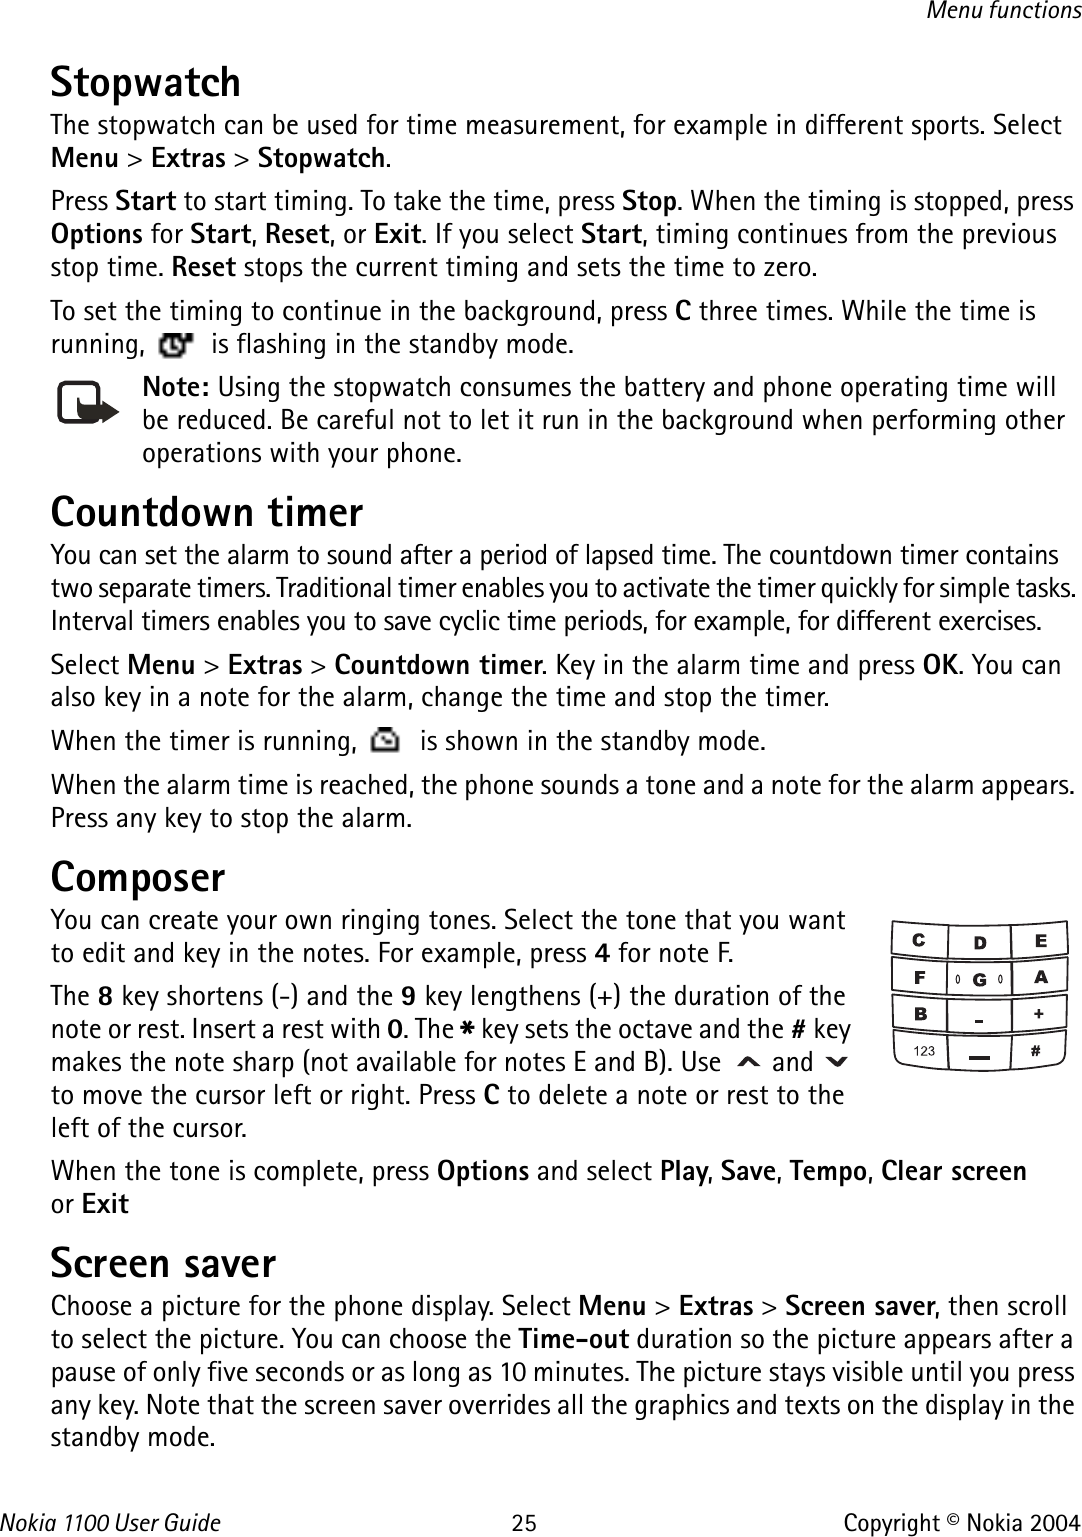 Nokia 110 0  User Guide 25 Copyright © Nokia 2004Menu functionsStopwatch The stopwatch can be used for time measurement, for example in different sports. Select Menu &gt; Extras &gt; Stopwatch.Press Start to start timing. To take the time, press Stop. When the timing is stopped, press Options for Start, Reset, or Exit. If you select Start, timing continues from the previous stop time. Reset stops the current timing and sets the time to zero.To set the timing to continue in the background, press C three times. While the time is running,   is flashing in the standby mode. Note: Using the stopwatch consumes the battery and phone operating time will be reduced. Be careful not to let it run in the background when performing other operations with your phone.Countdown timerYou can set the alarm to sound after a period of lapsed time. The countdown timer contains two separate timers. Traditional timer enables you to activate the timer quickly for simple tasks. Interval timers enables you to save cyclic time periods, for example, for different exercises. Select Menu &gt; Extras &gt; Countdown timer. Key in the alarm time and press OK. You can also key in a note for the alarm, change the time and stop the timer.When the timer is running,   is shown in the standby mode.When the alarm time is reached, the phone sounds a tone and a note for the alarm appears. Press any key to stop the alarm.ComposerYou can create your own ringing tones. Select the tone that you want to edit and key in the notes. For example, press 4 for note F.The 8 key shortens (-) and the 9 key lengthens (+) the duration of the note or rest. Insert a rest with 0. The * key sets the octave and the # key makes the note sharp (not available for notes E and B). Use   and   to move the cursor left or right. Press C to delete a note or rest to the left of the cursor. When the tone is complete, press Options and select Play, Save, Tempo, Clear screen or ExitScreen saverChoose a picture for the phone display. Select Menu &gt; Extras &gt; Screen saver, then scroll to select the picture. You can choose the Time-out duration so the picture appears after a pause of only five seconds or as long as 10 minutes. The picture stays visible until you press any key. Note that the screen saver overrides all the graphics and texts on the display in the standby mode. 